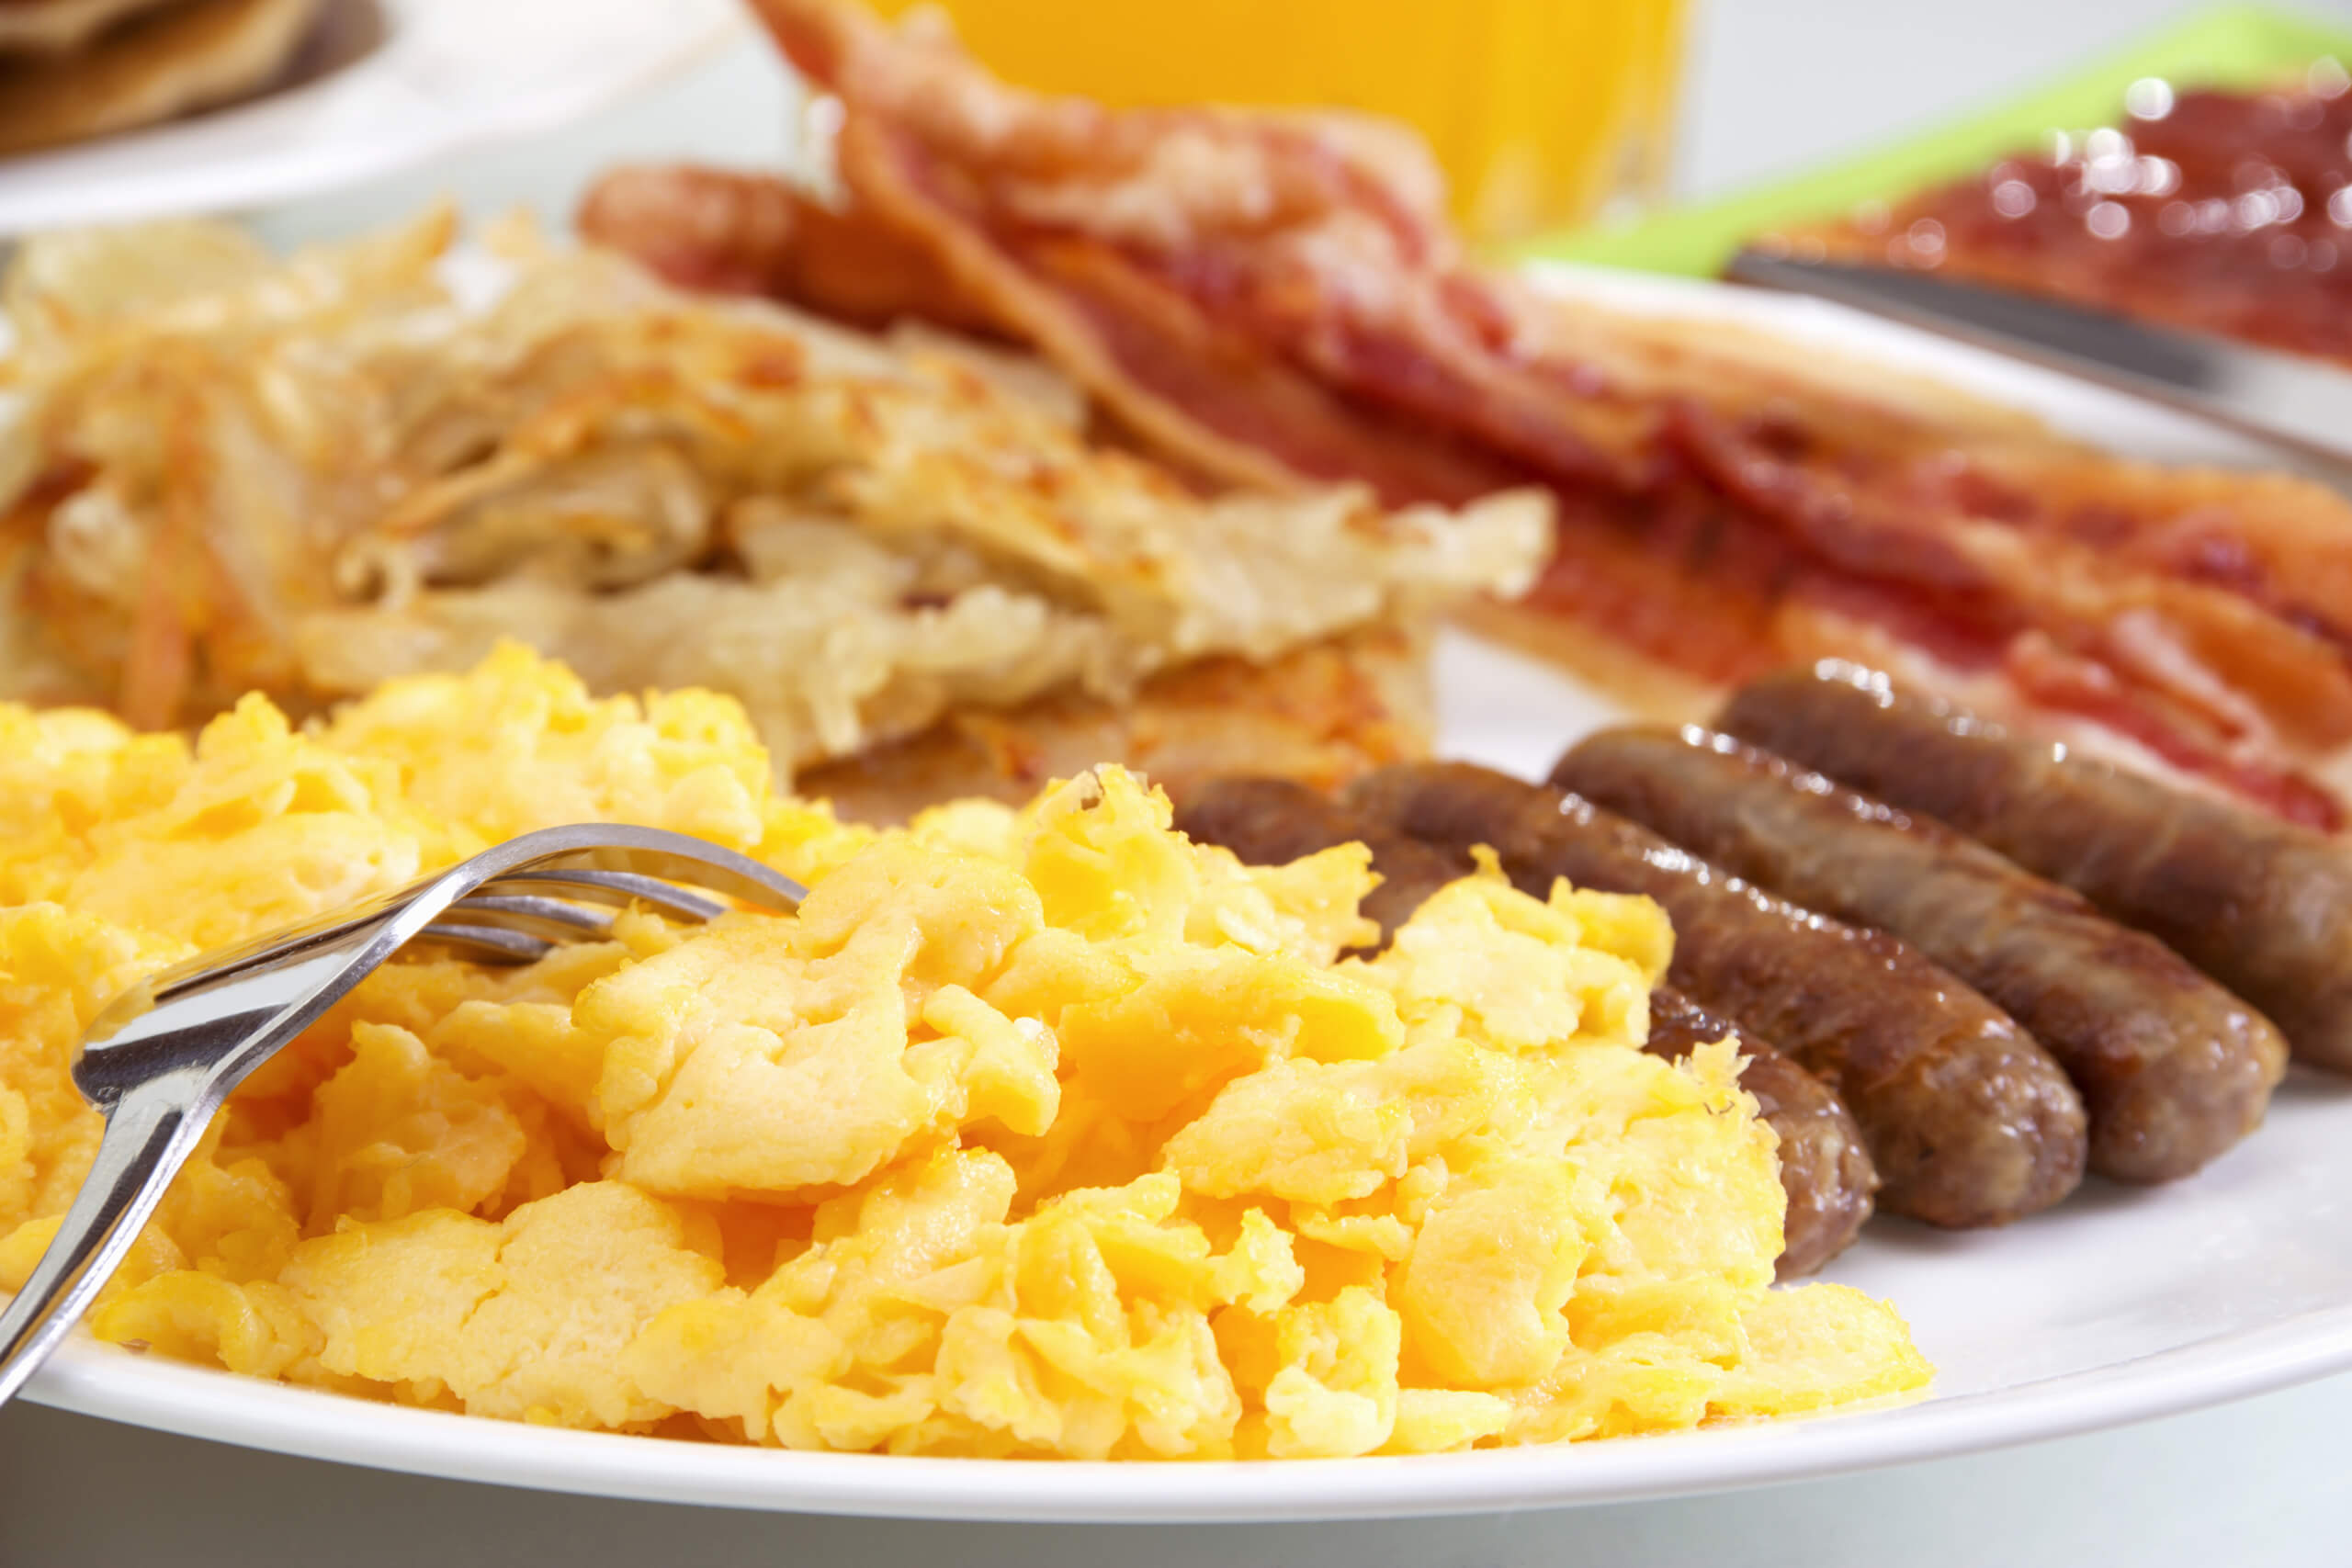 Fresh Breakfast Plate. Served up hot and fresh to provide the fuel needed to boost productivity and morale.